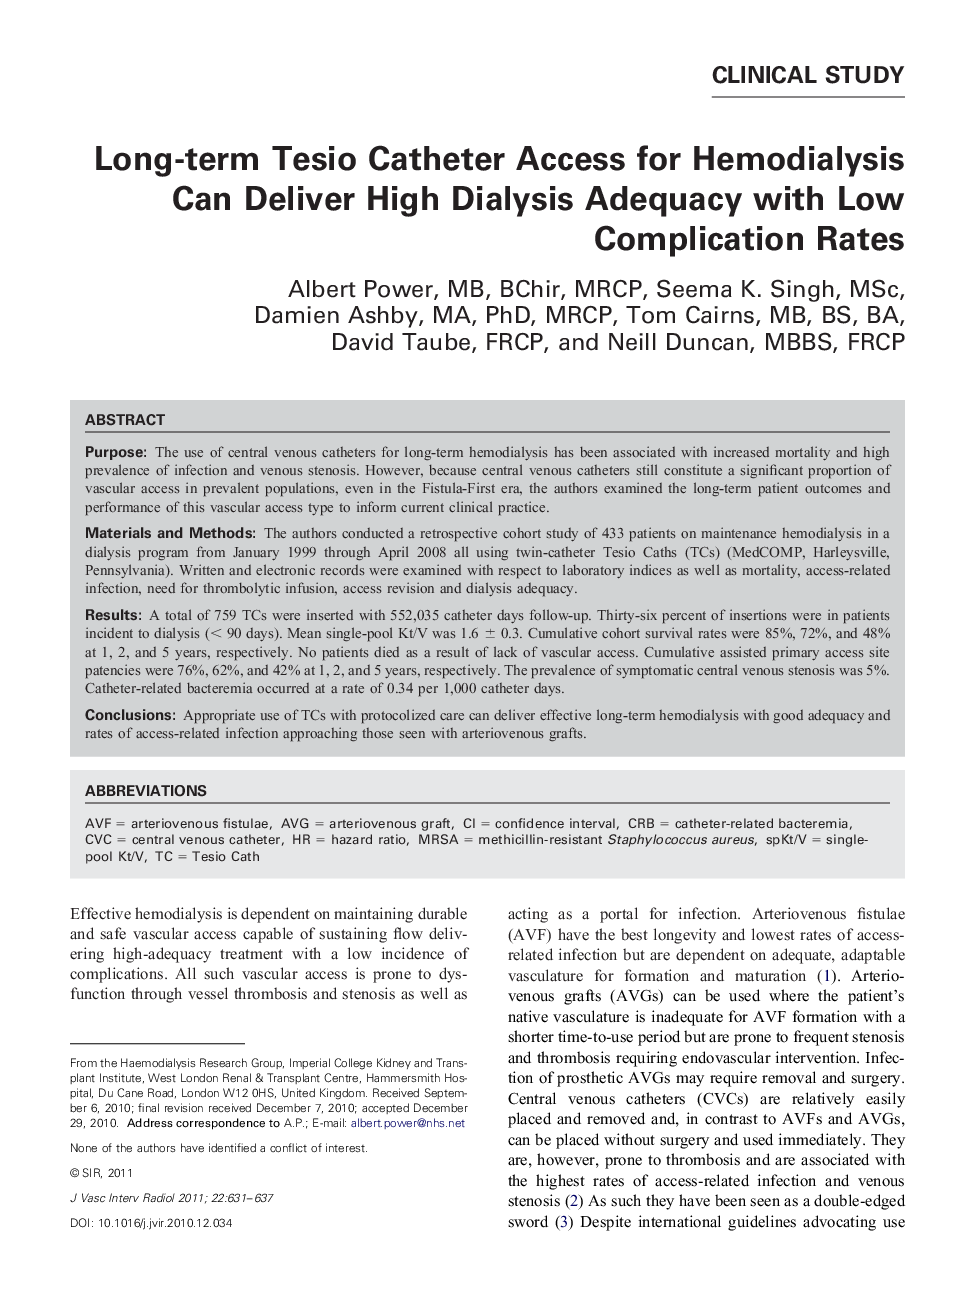 Long-term Tesio Catheter Access for Hemodialysis Can Deliver High Dialysis Adequacy with Low Complication Rates